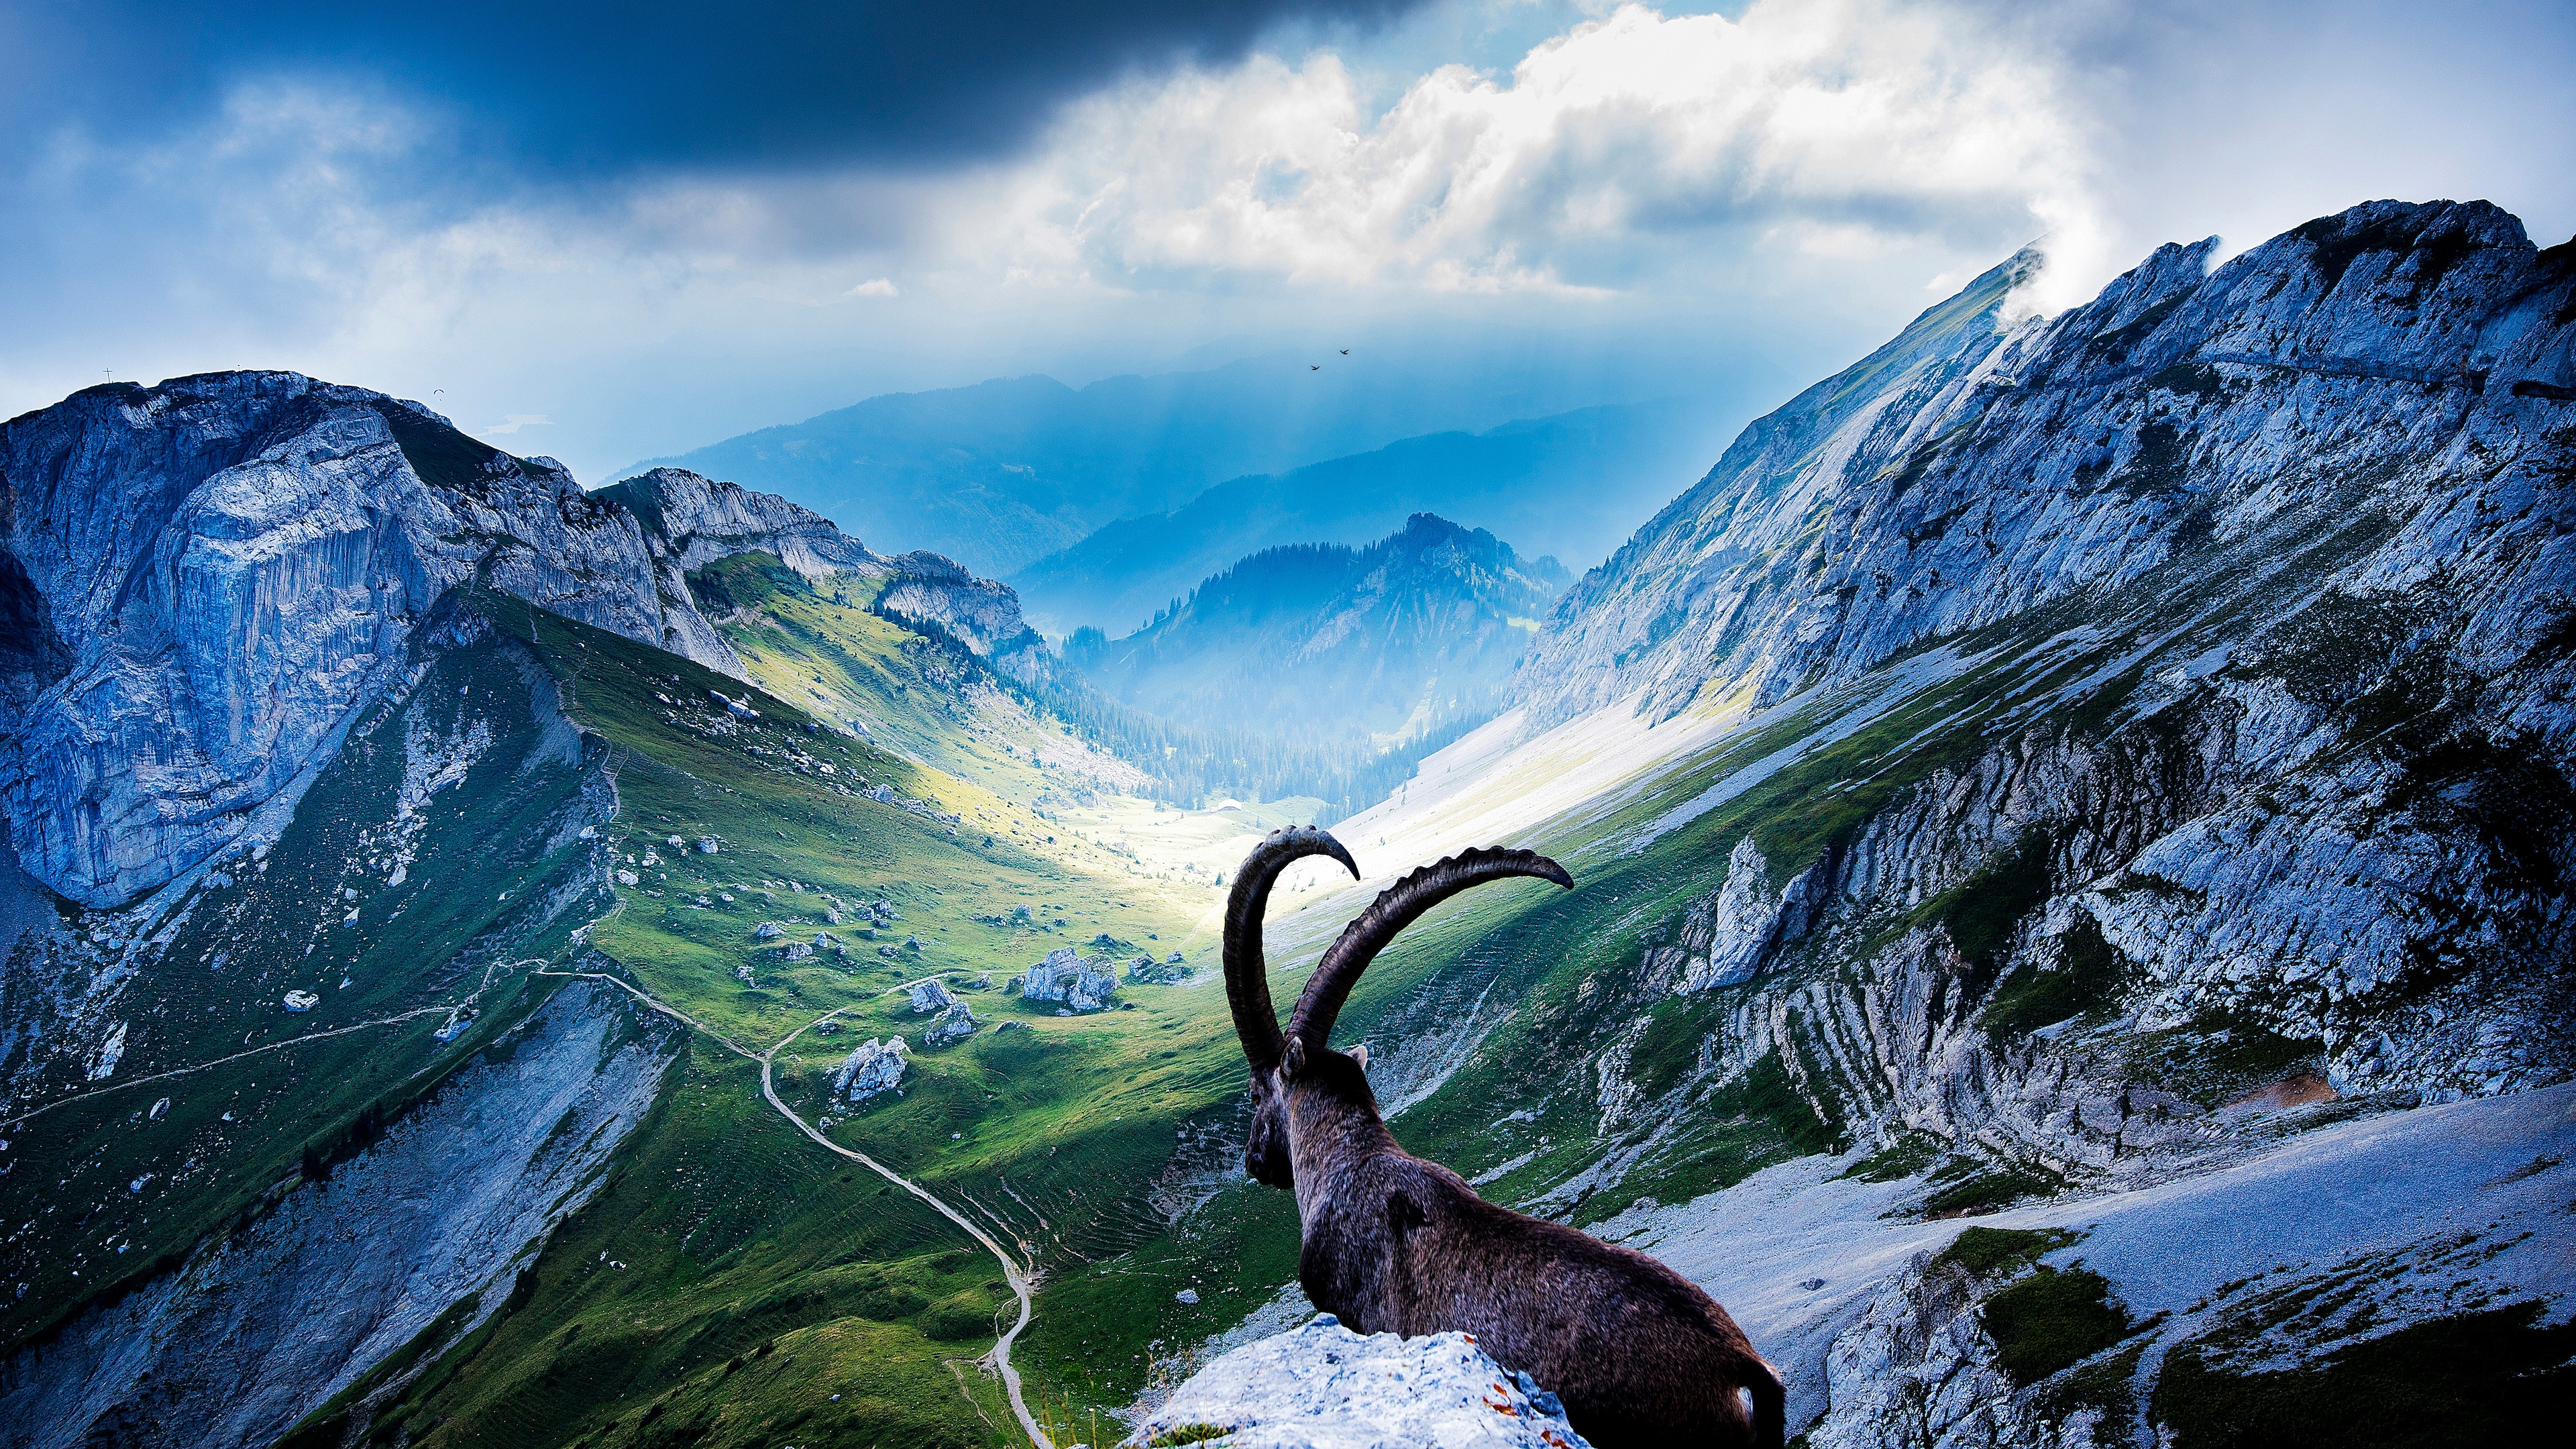 Goat at Mount Pilatus for 3840 x 2160 Ultra HD resolution